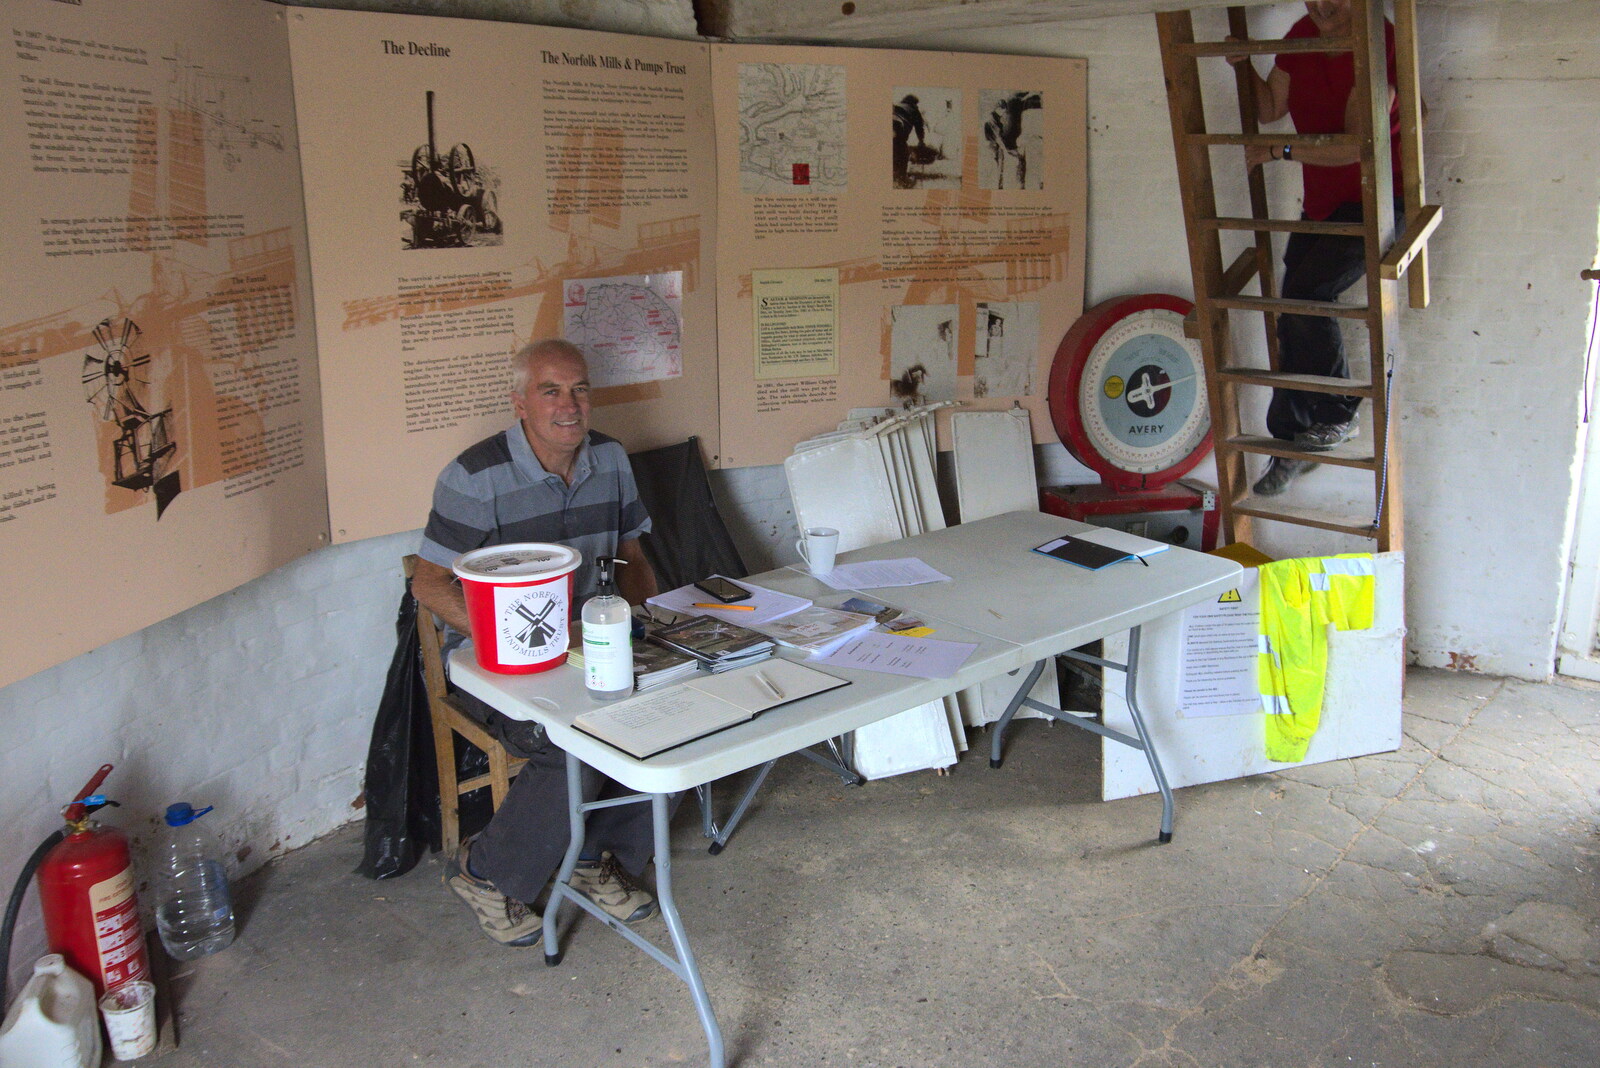 The dude on the ticket desk from An Open Day at the Windmill, Billingford, Norfolk - 21st August 2021